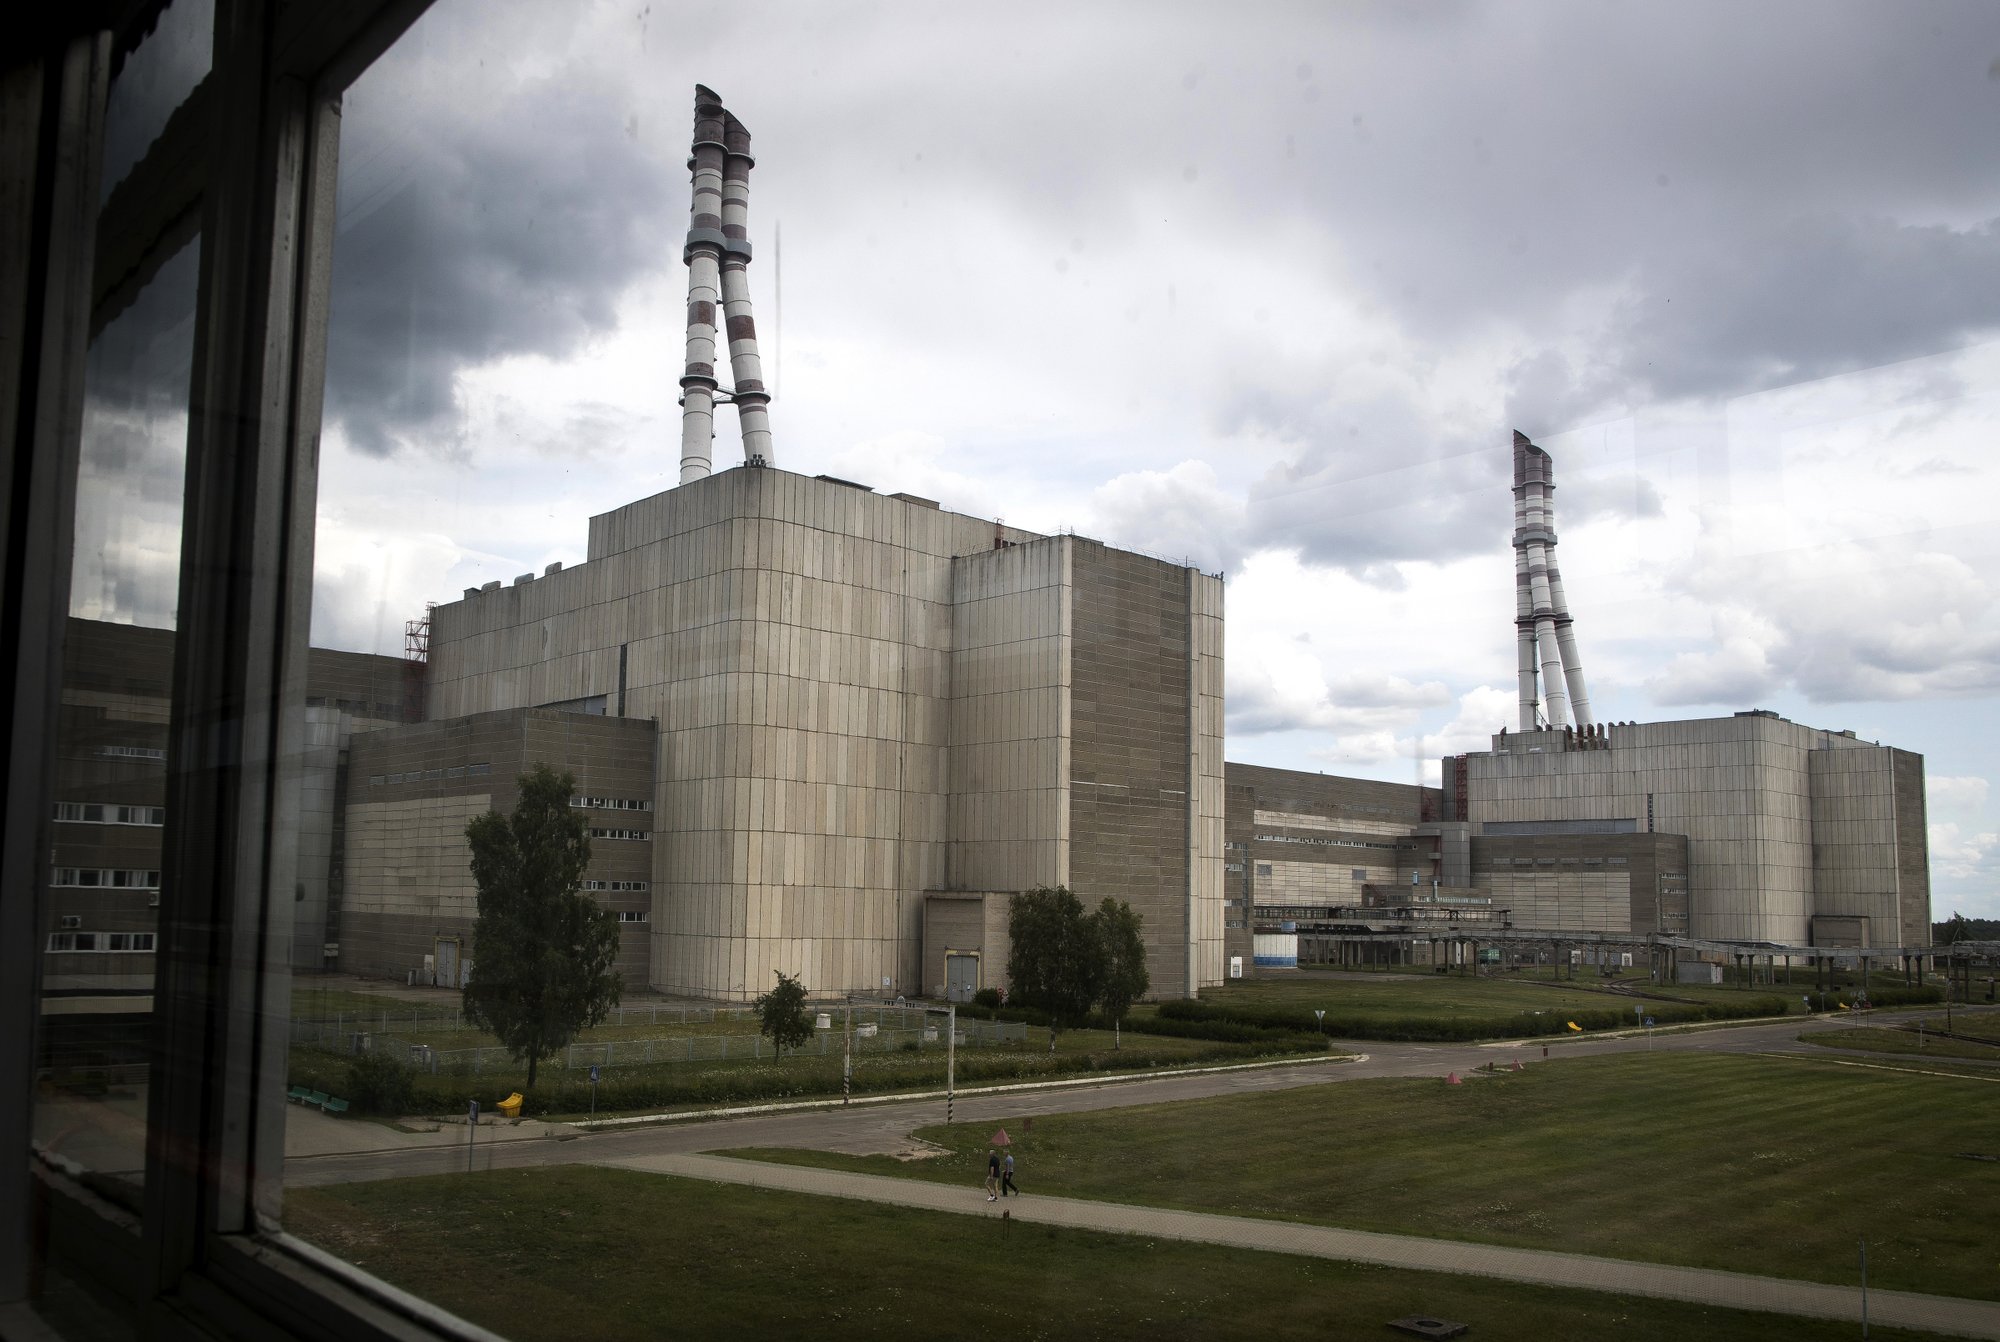 Chernobyl Miniseries Sends Curious Tourists To Lithuania